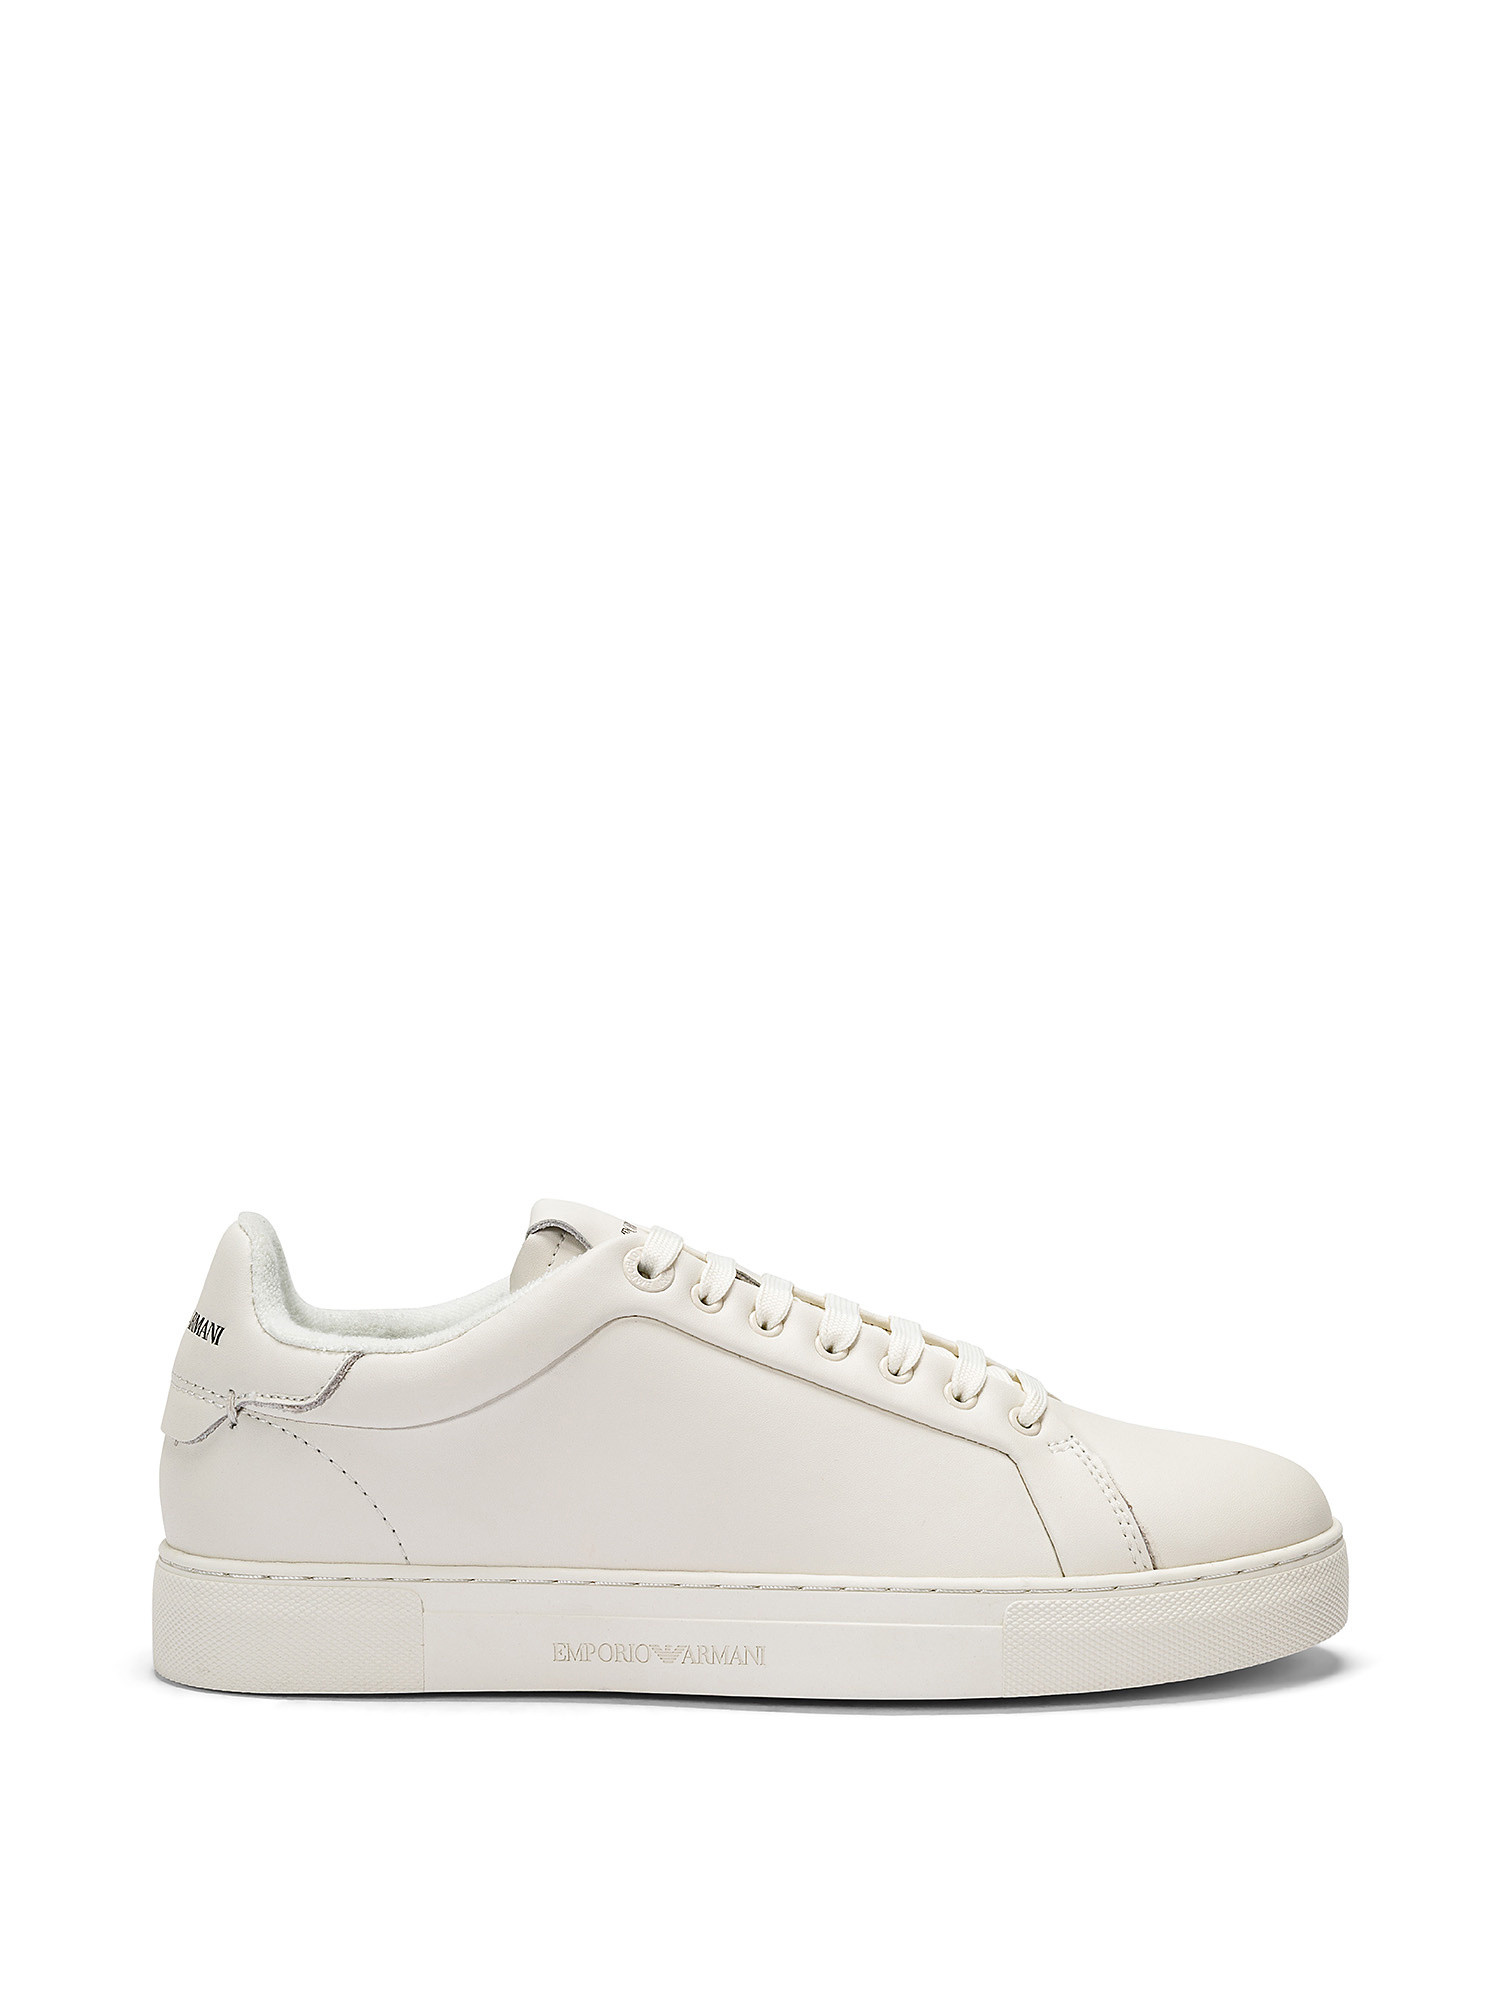 Emporio Armani - Sneakers, White, large image number 0